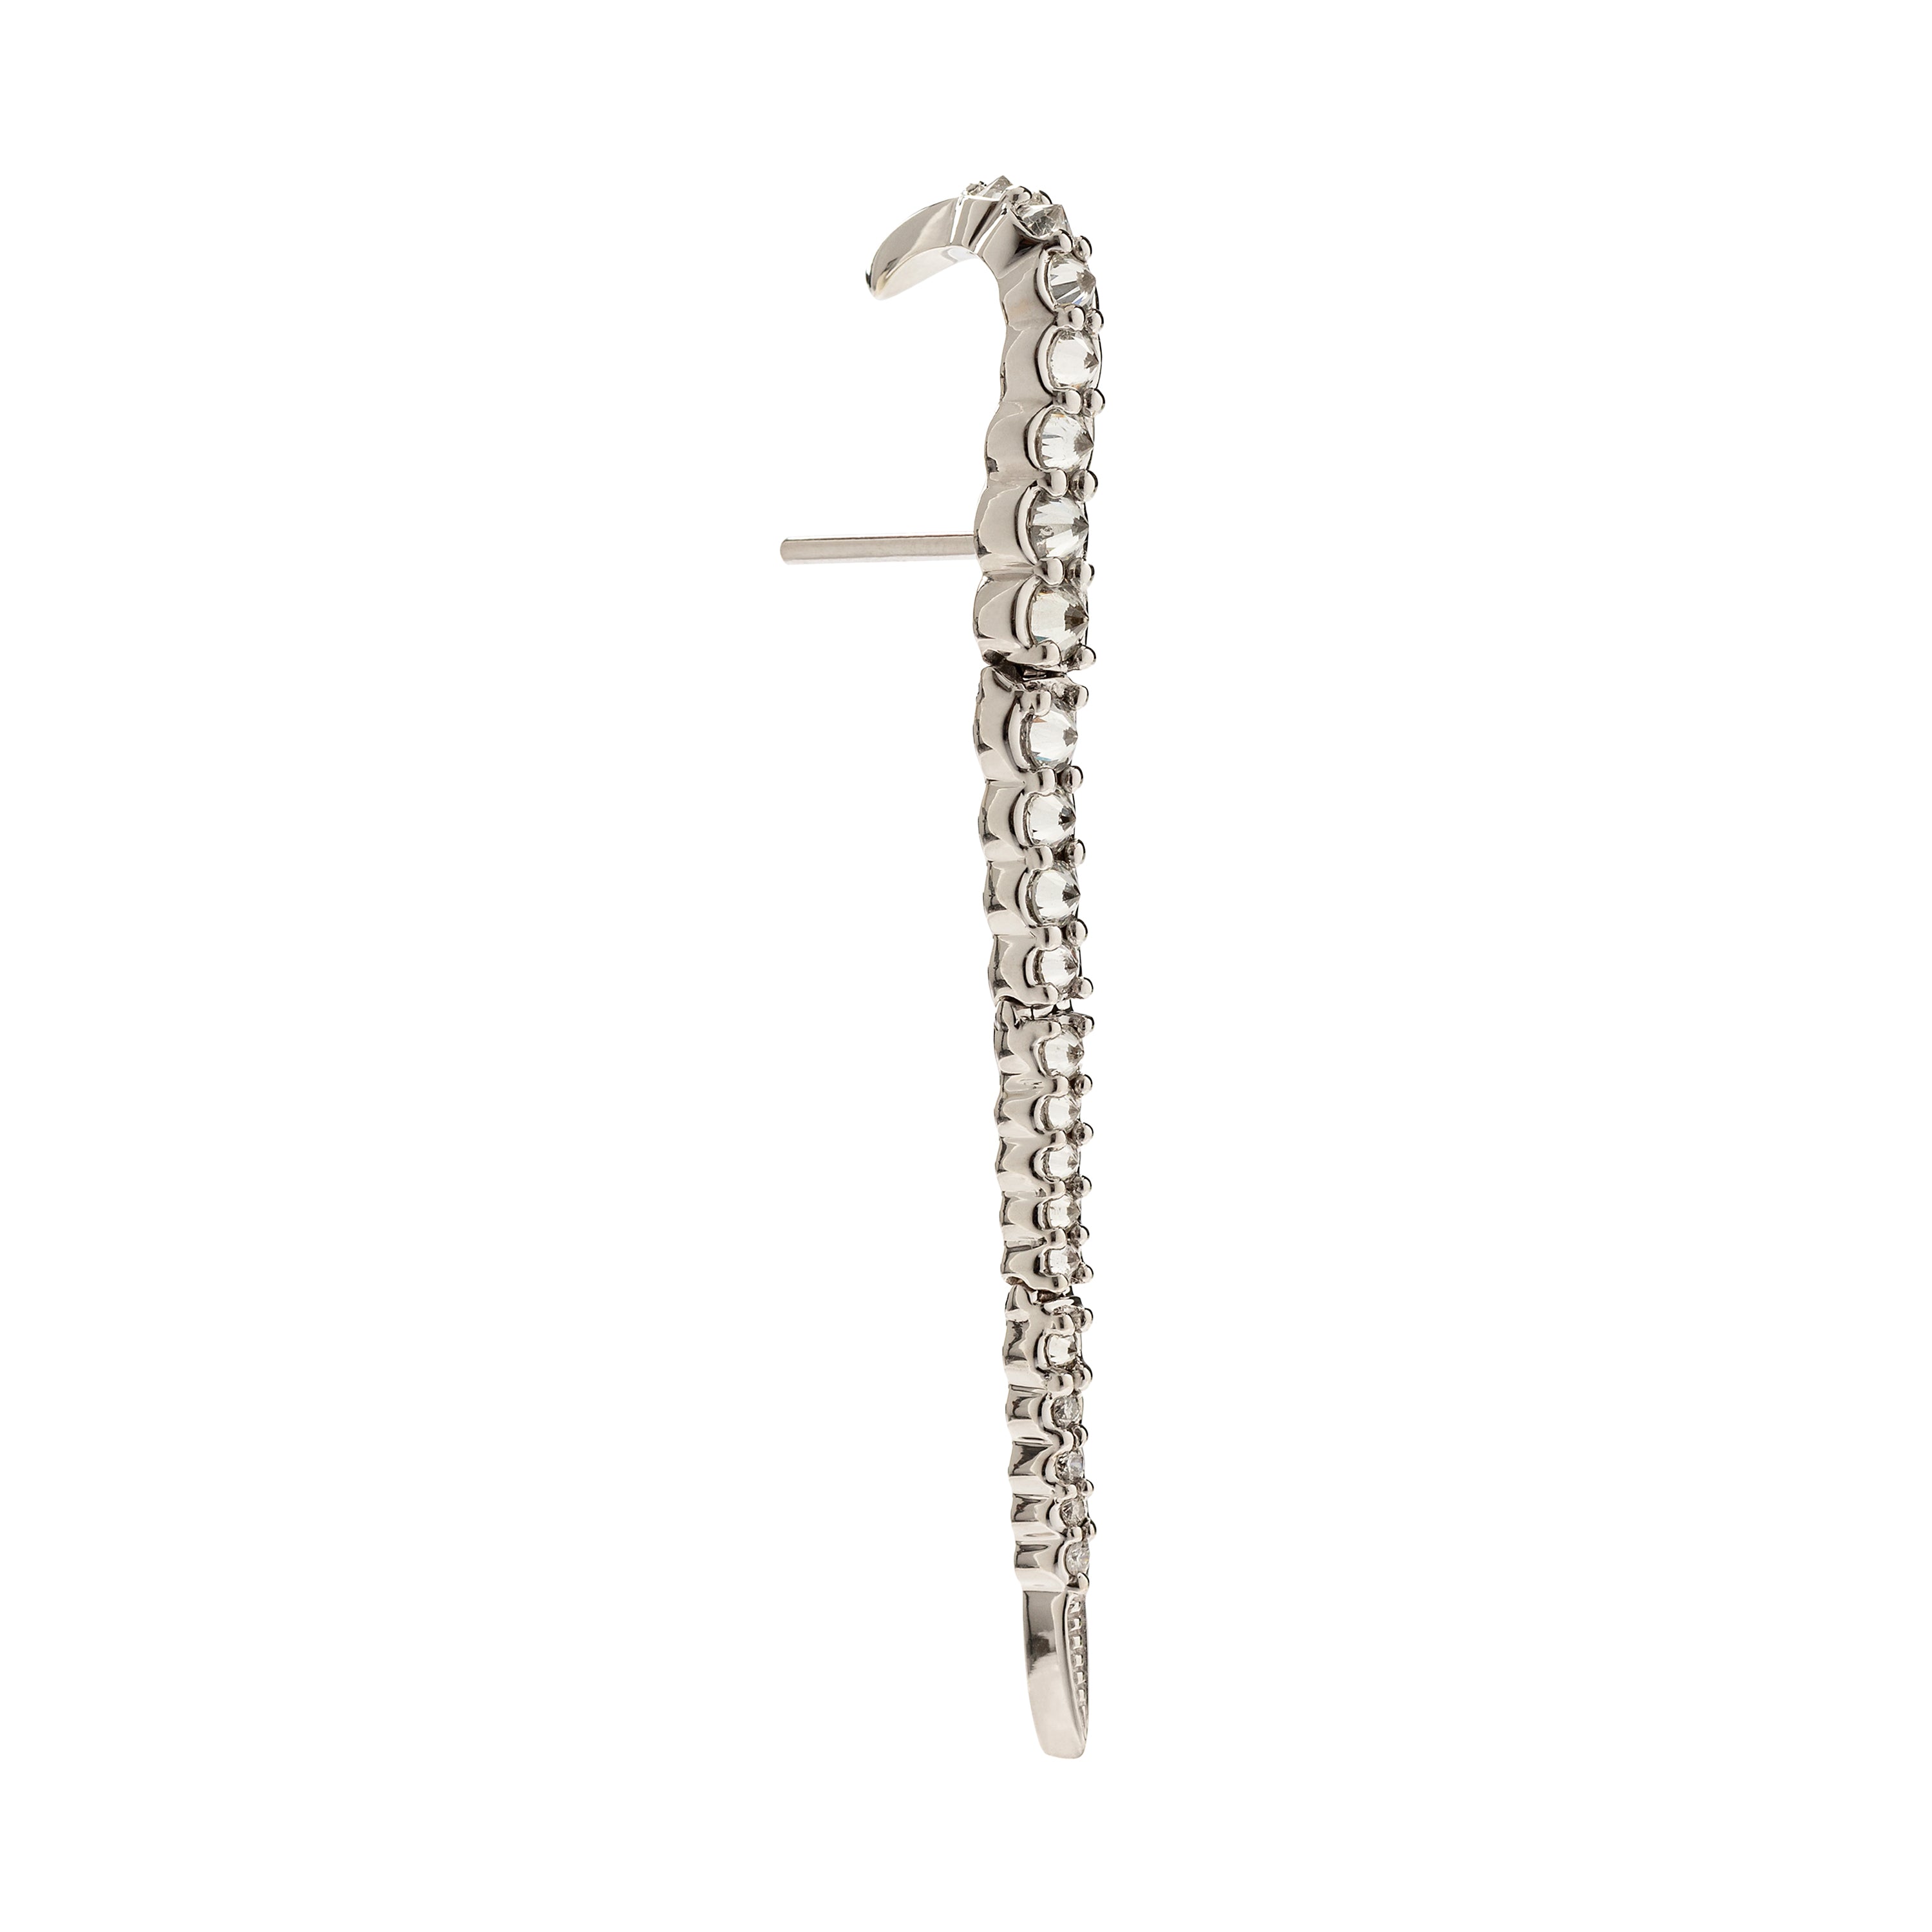 18k white gold earring with diamonds